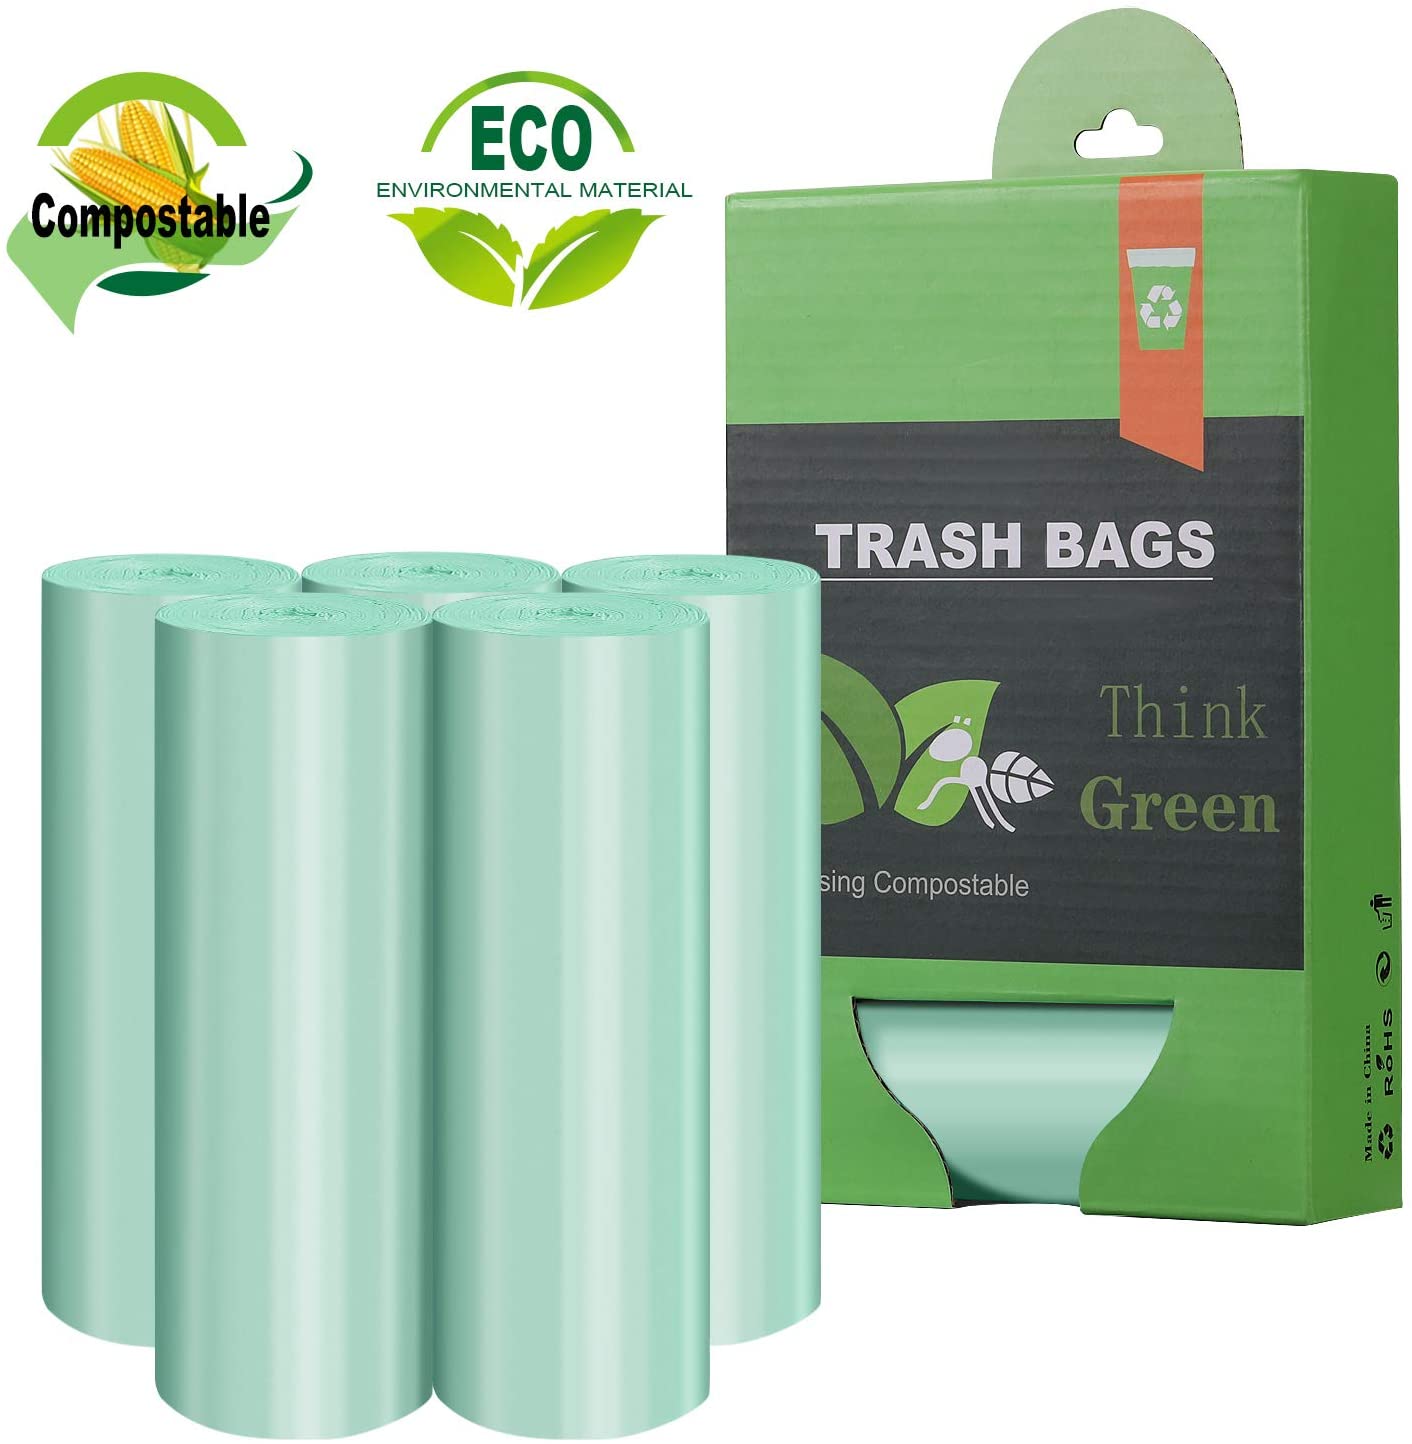 Buy Compostable Certified Tall Kitchen Trash Bags (13 Gallon x 50 Bags)  Heavy Duty, Plant-Based Unscented Trash Can Liners Thick and Strong Bags  Kitchen Bin, Office Garbage by Bimpact Global Now! Only $